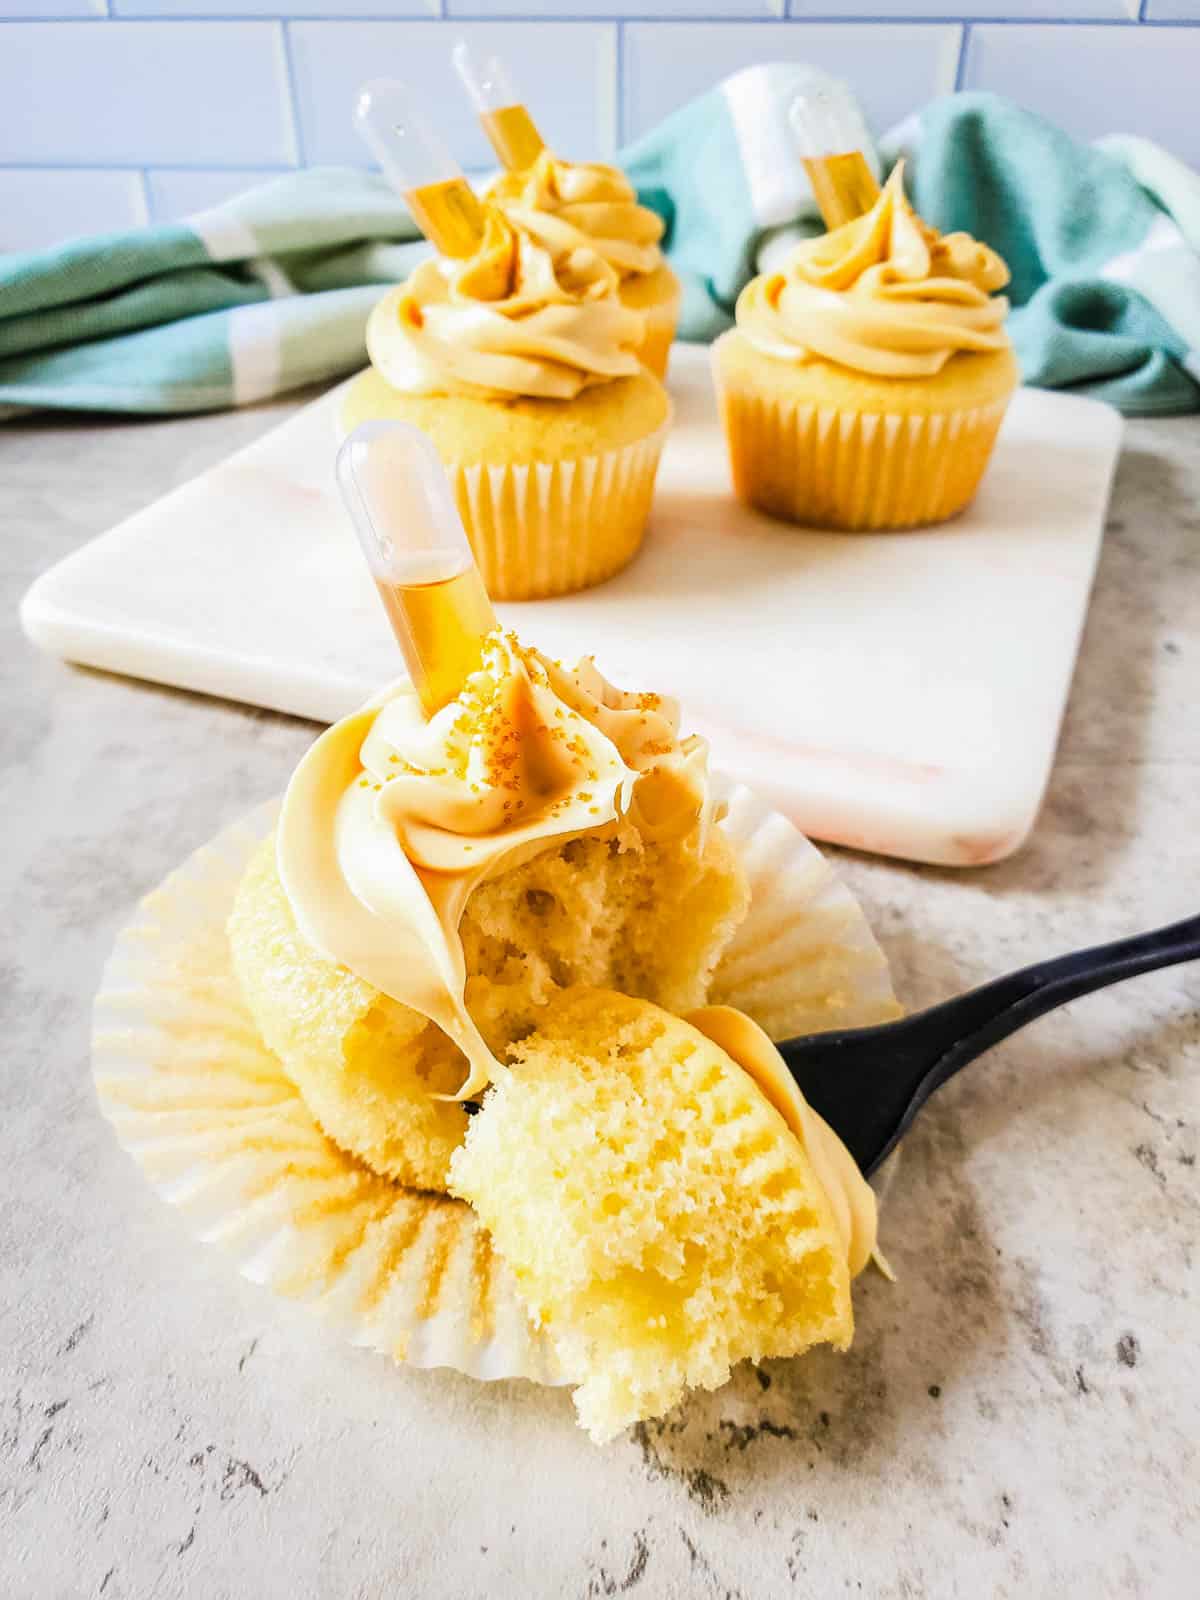 Hennessy cupcakes with salted caramel frosting cut in half.